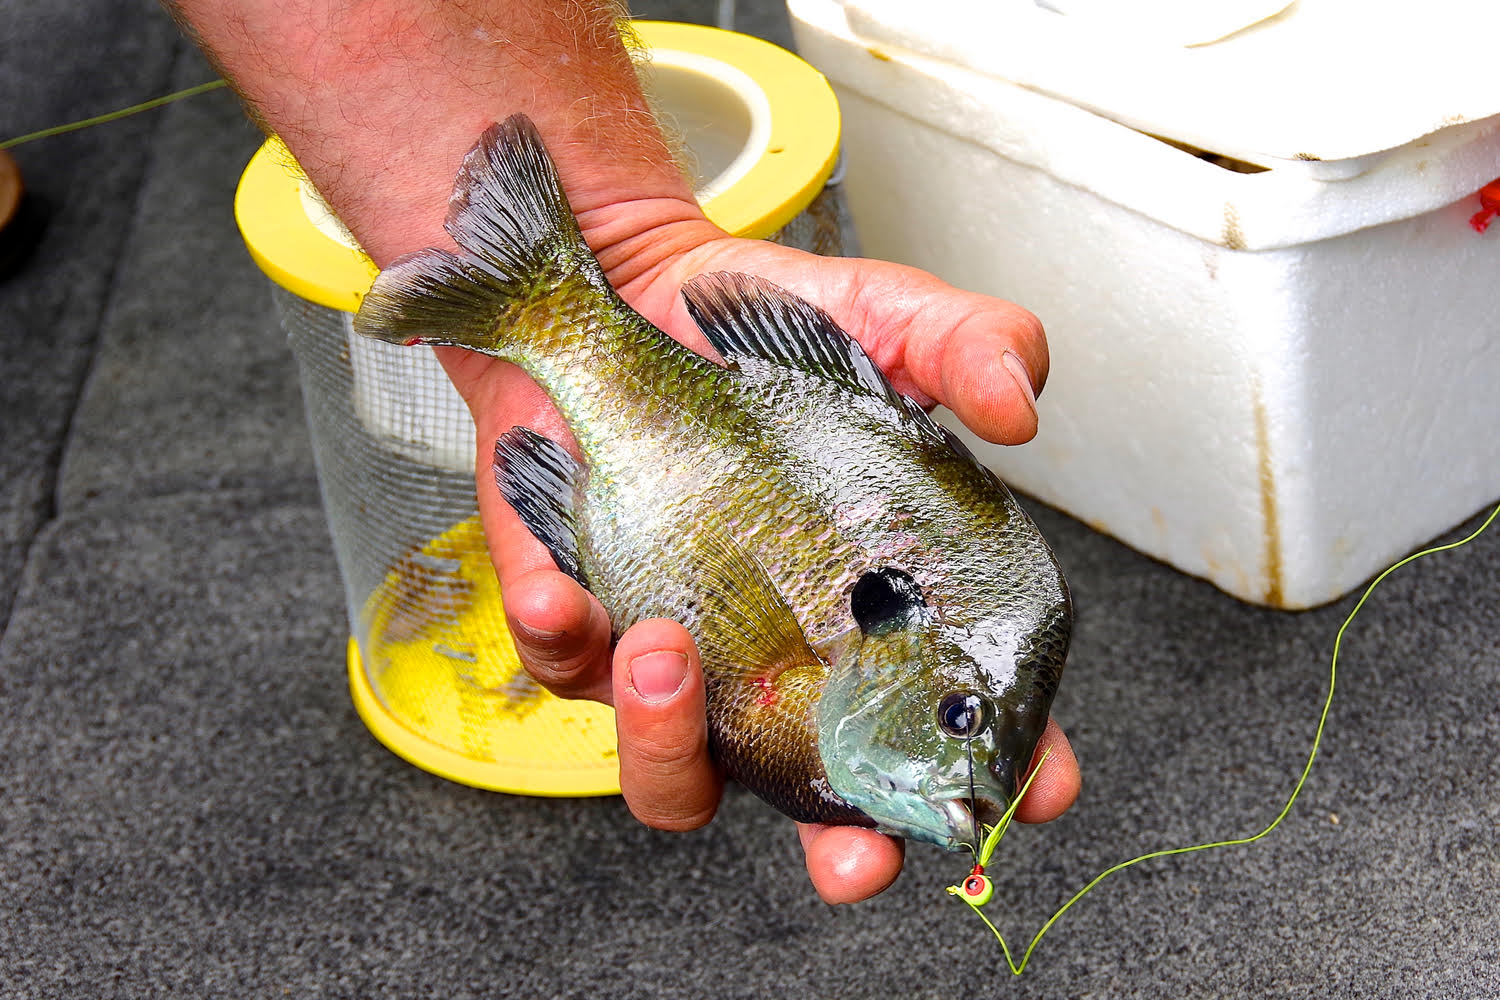 Fly Fishing Illinois Bluegills: Can You Get Down with It